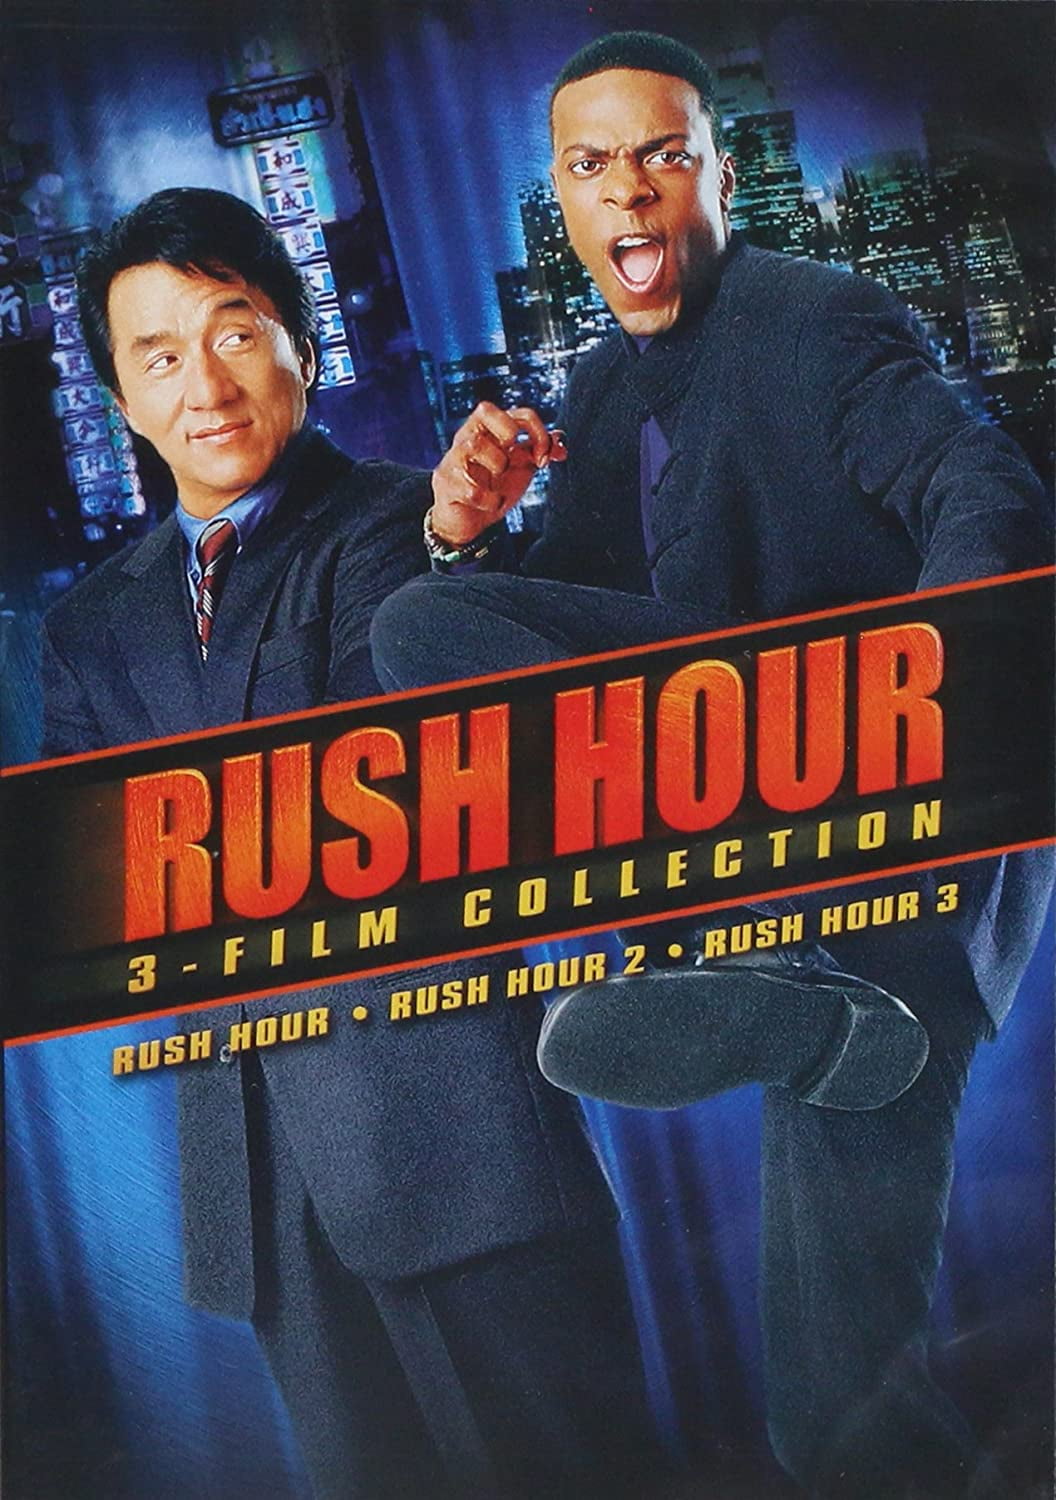 apoorva singhal add photo rush hour 1 full movie download